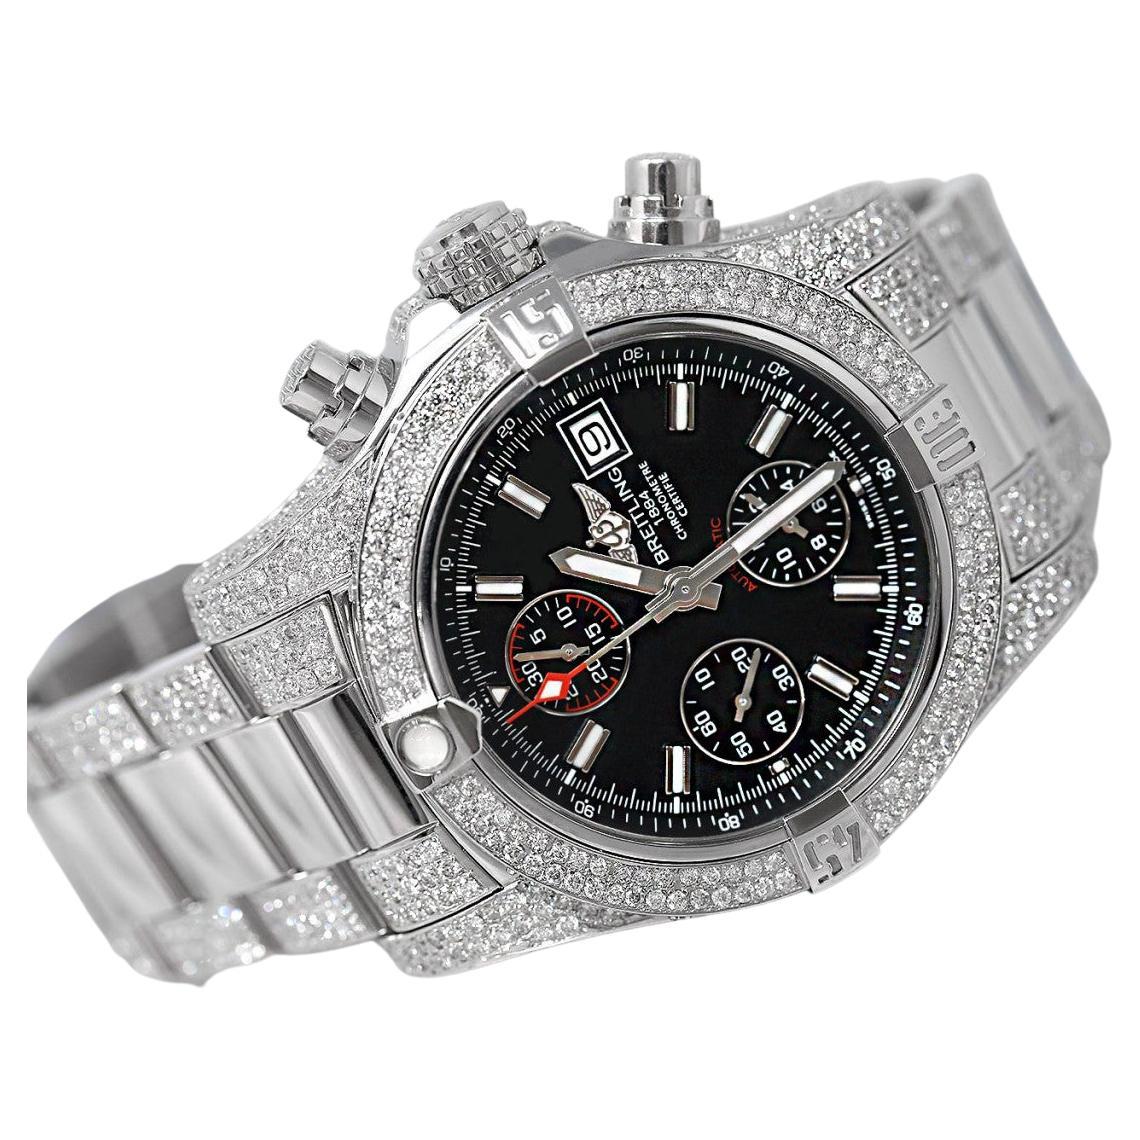 Breitling Avenger II Chronograph Black Dial Fully Iced Out Stainless Steel Watch For Sale